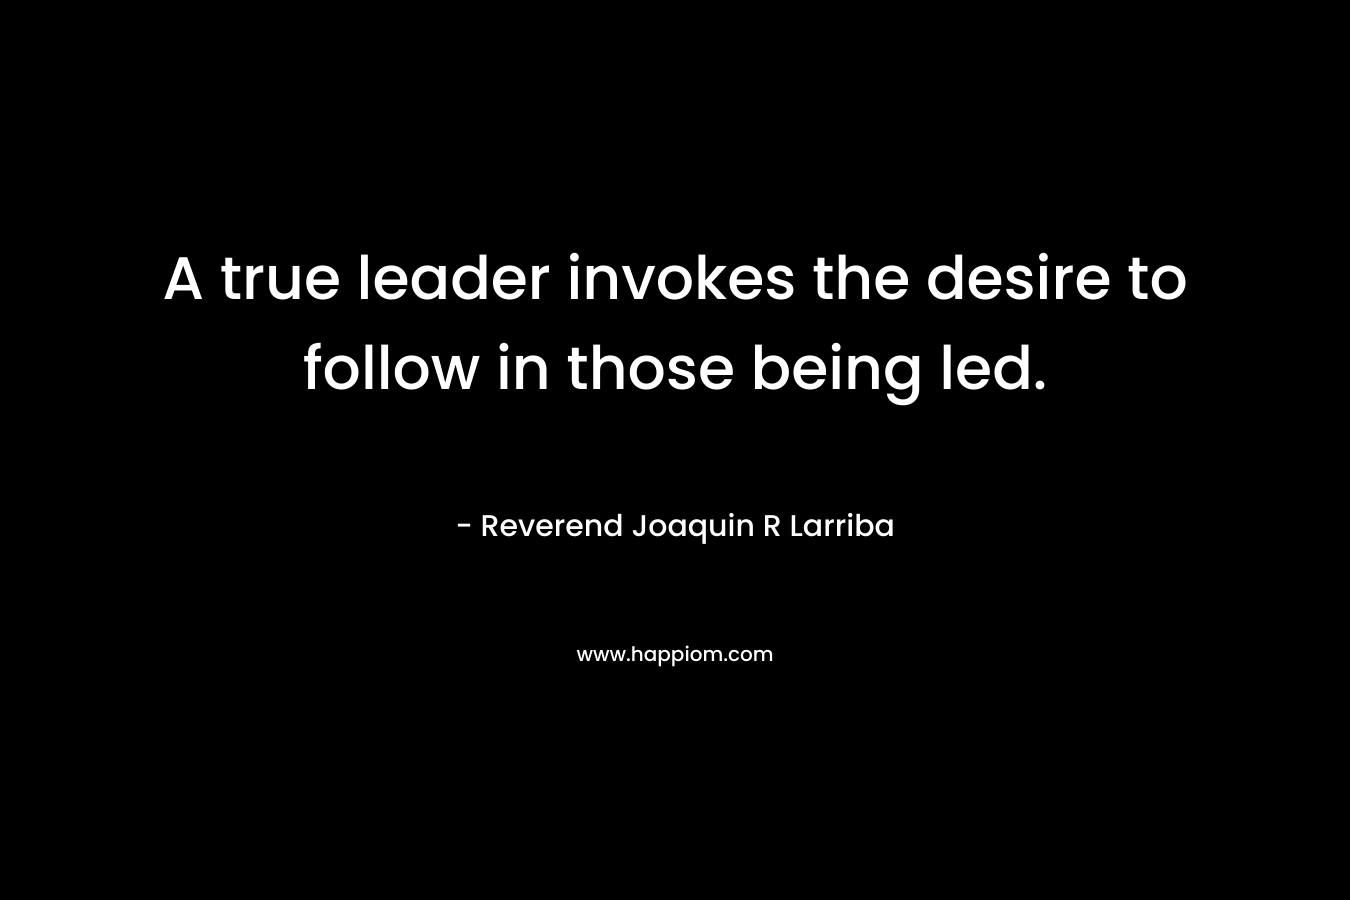 A true leader invokes the desire to follow in those being led.